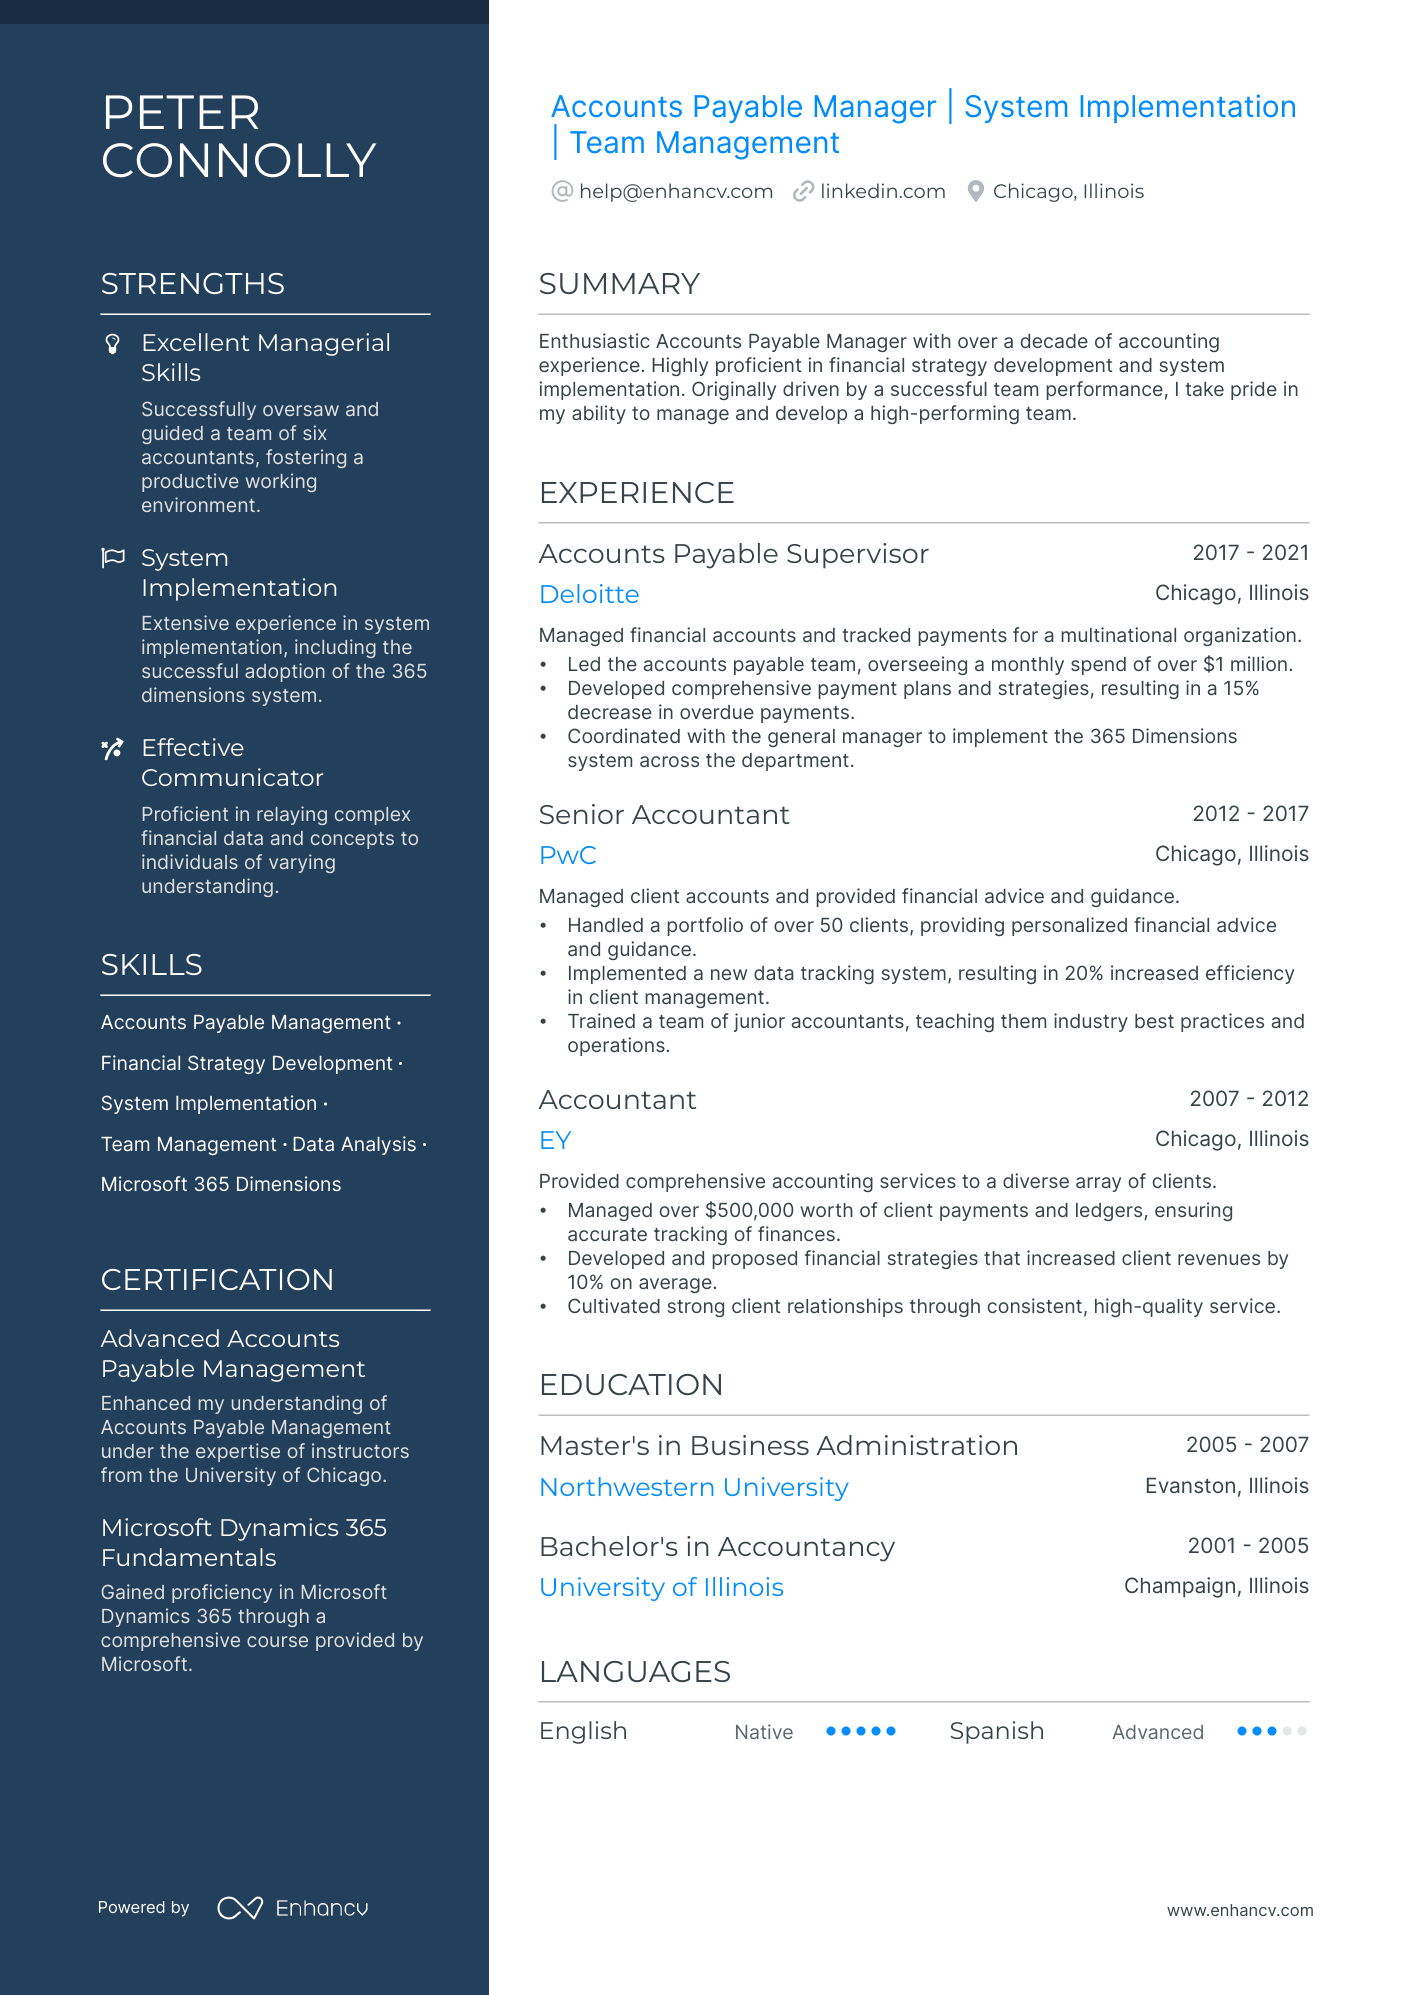 Accounts Payable Manager resume example